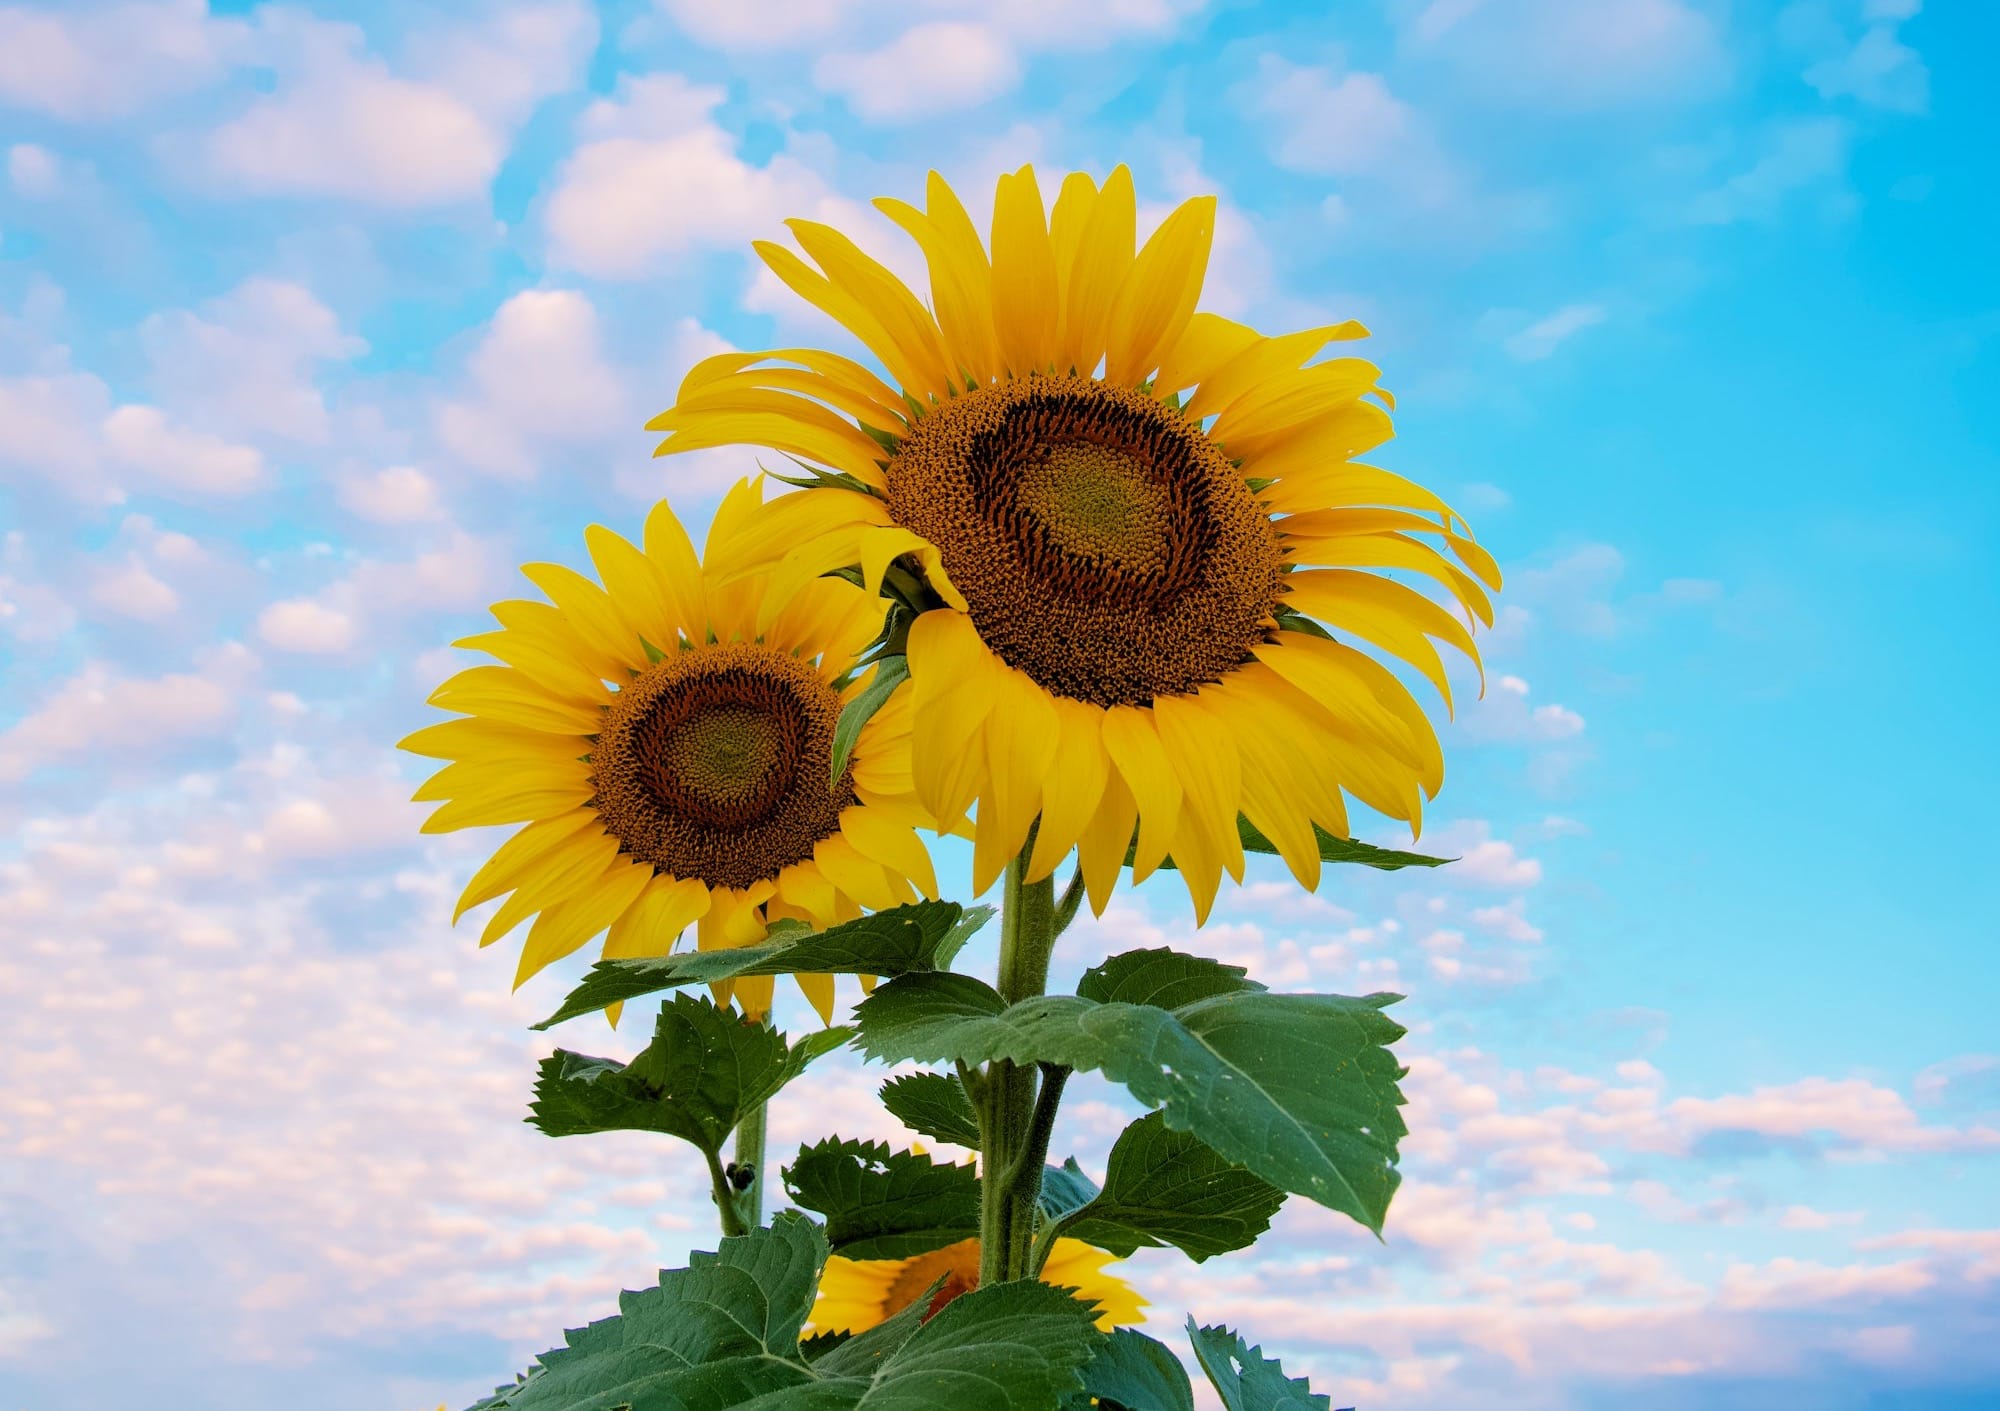 Caring for Sunflowers